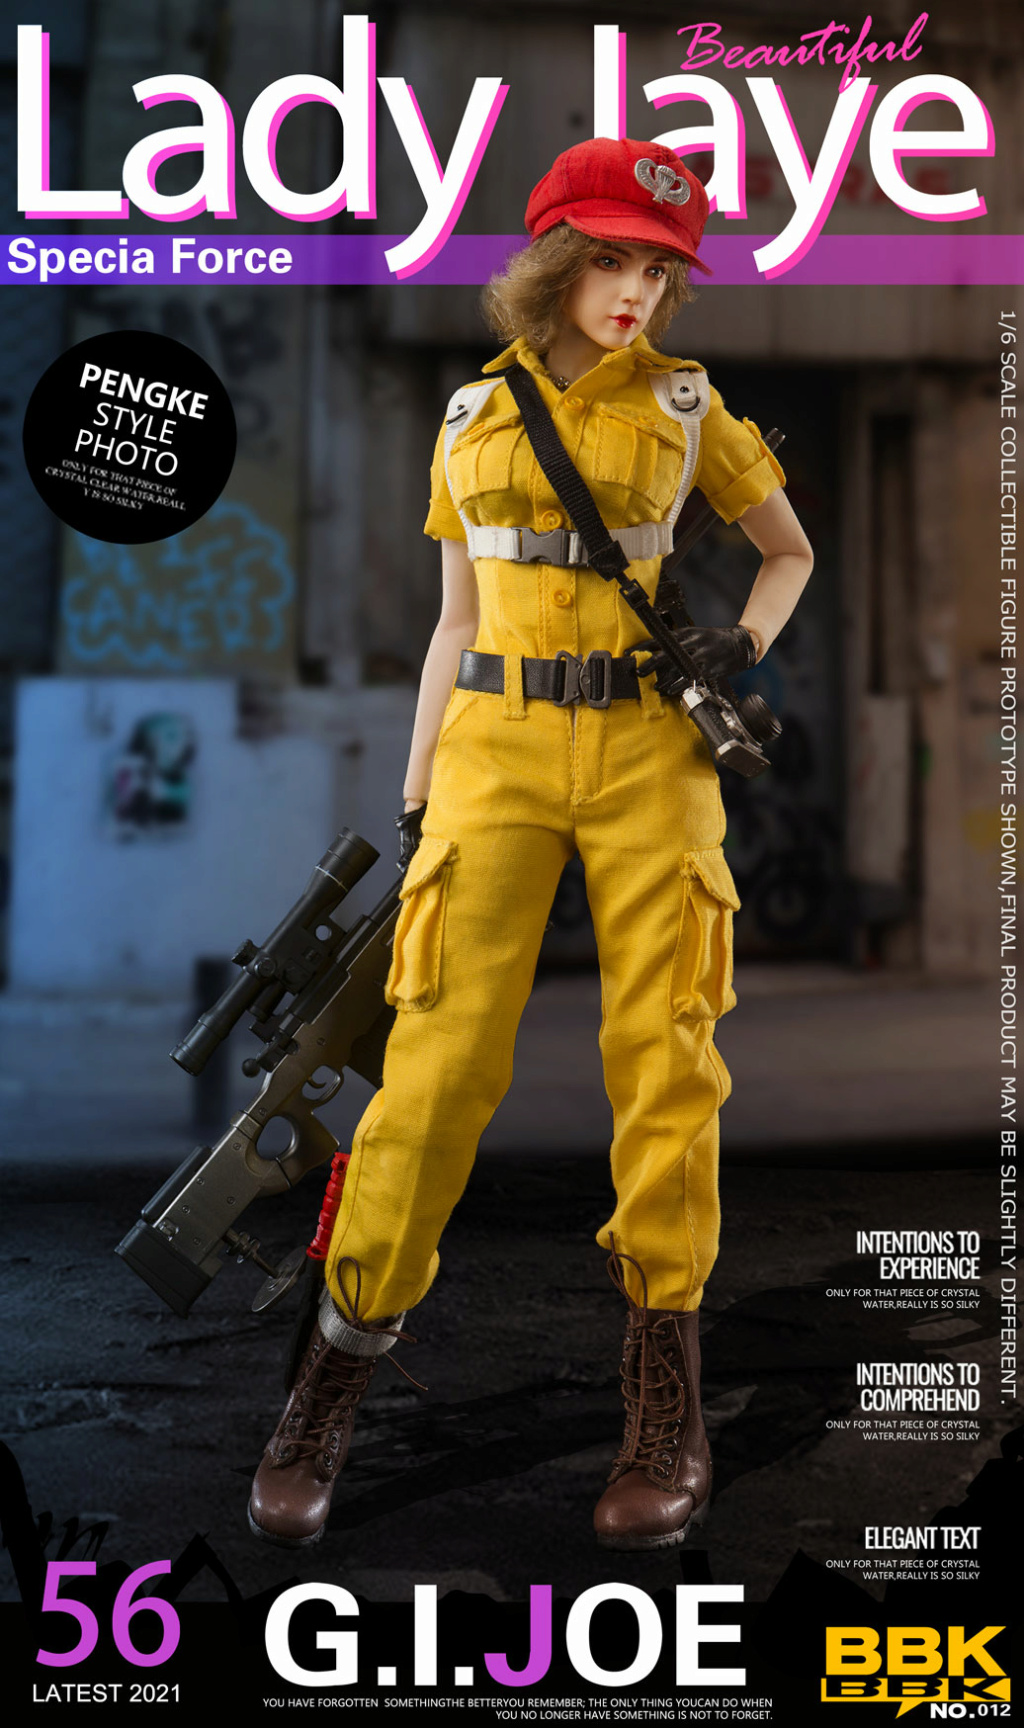 NEW PRODUCT: BBK: 1/6 GIJOE Jay Female Soldier Action Figure# 14575811